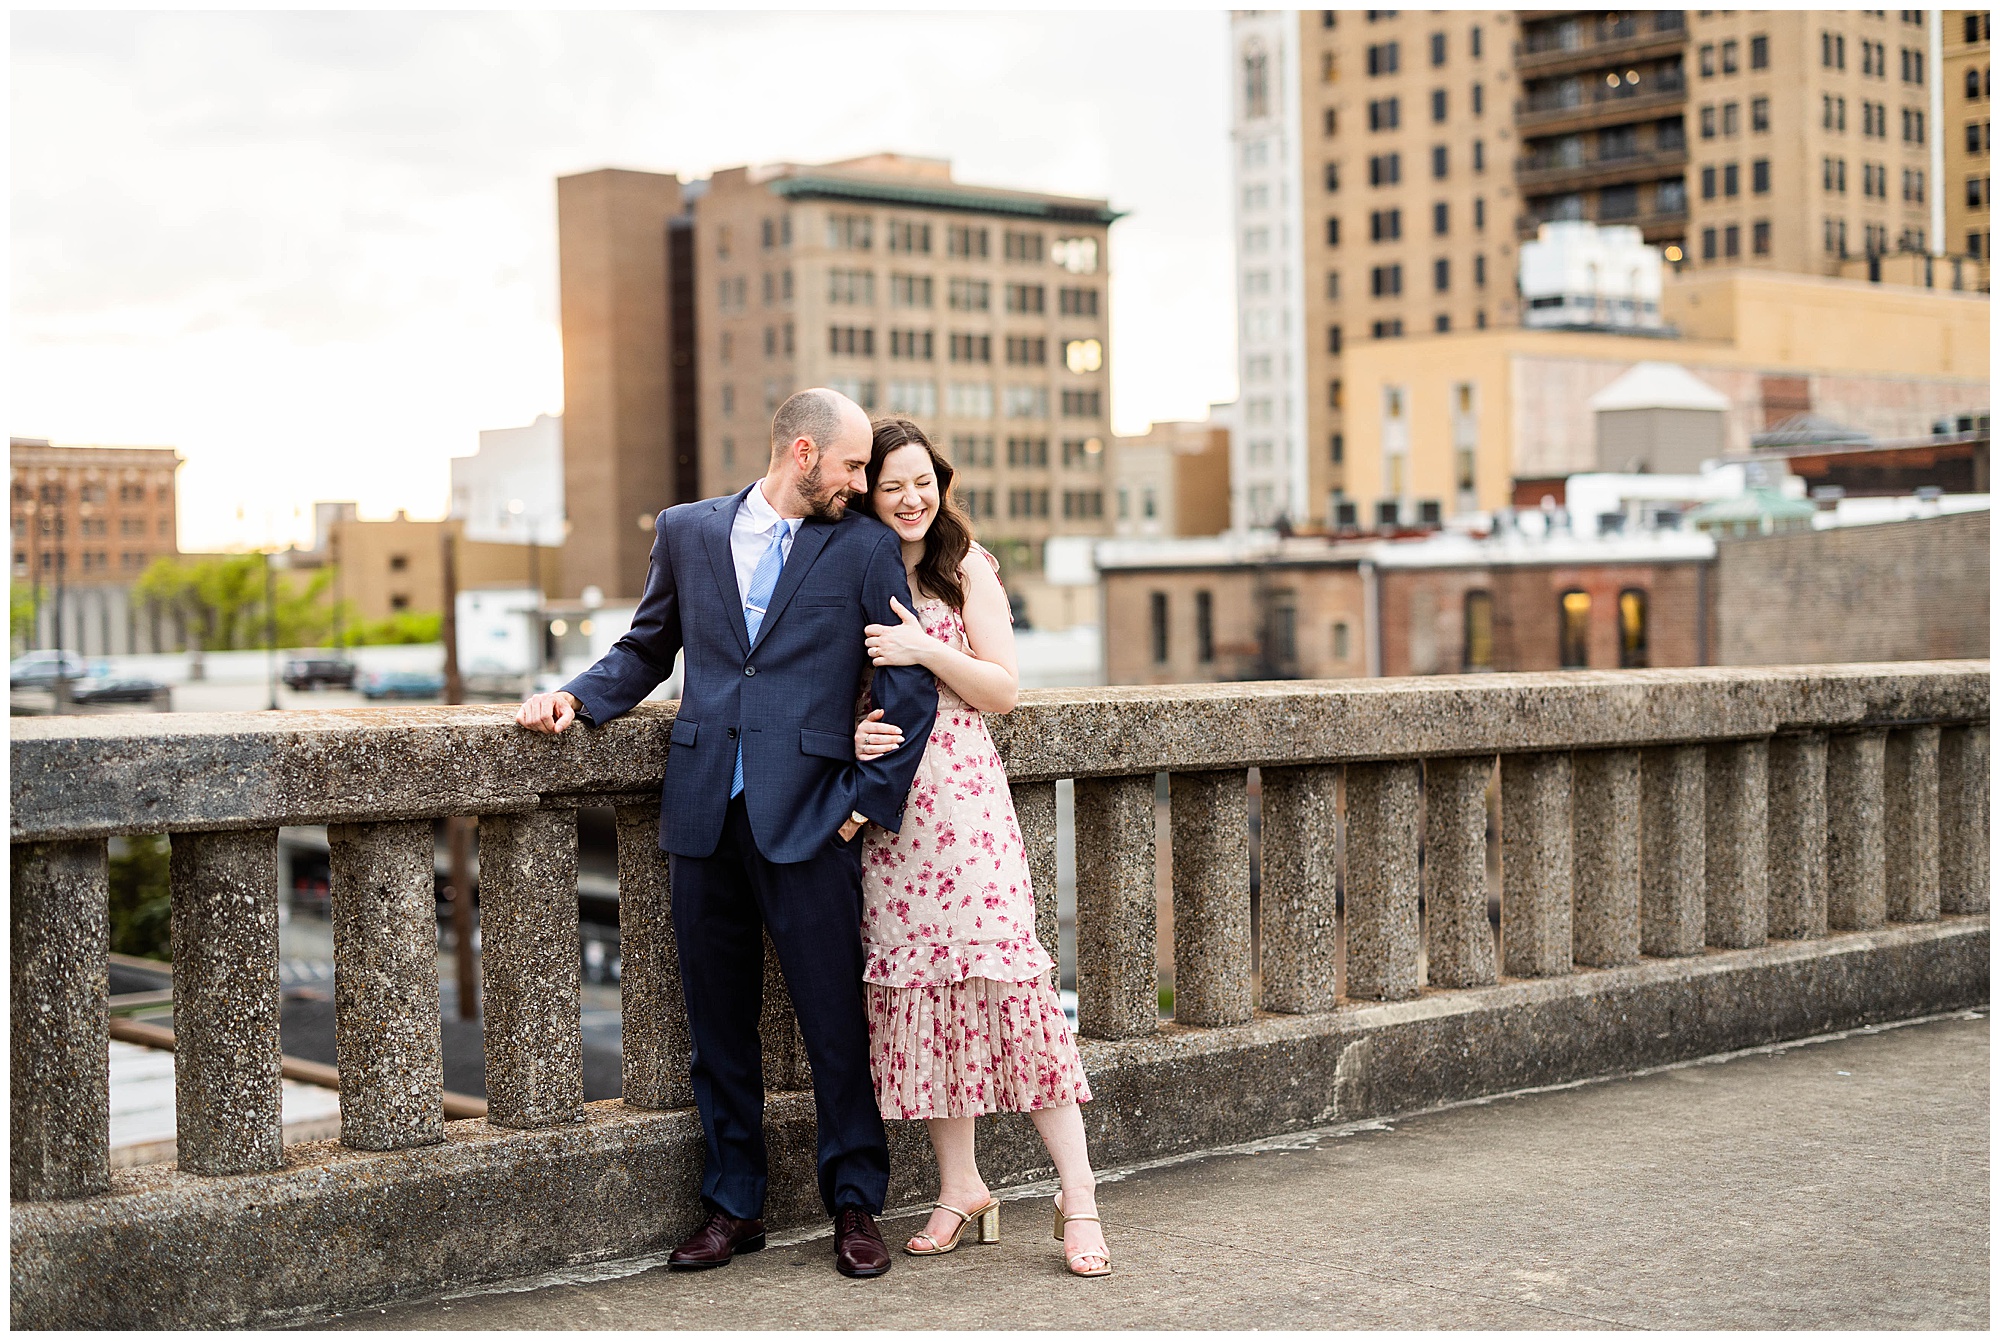 Ask your wedding photographer if they offer engagement sessions!